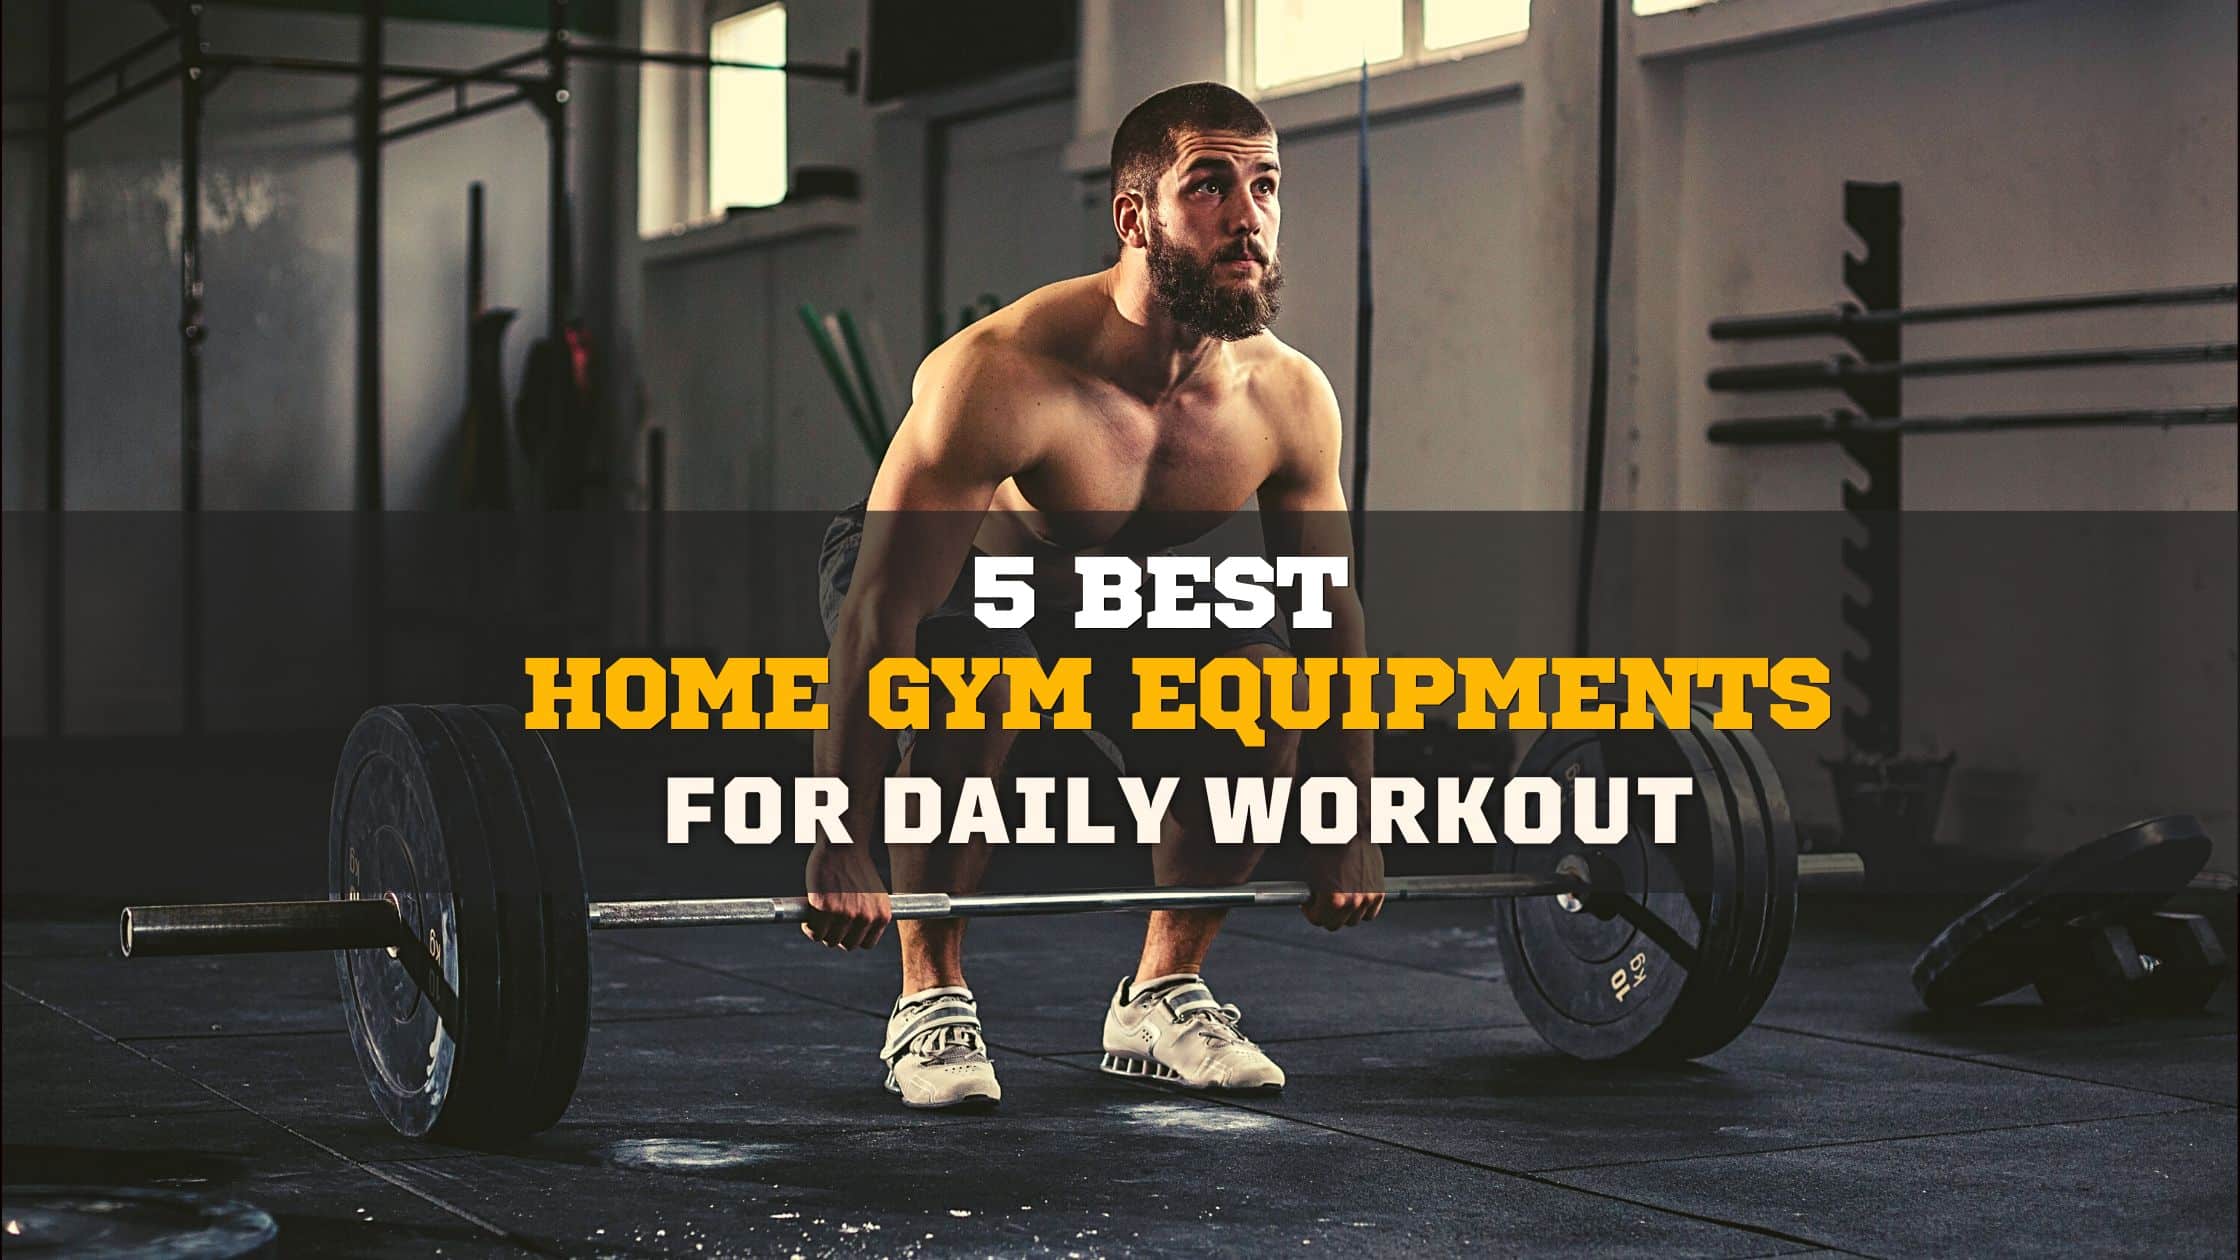 5 BEST HOME GYM EQUIPMENTS FOR DAILY WORKOUT